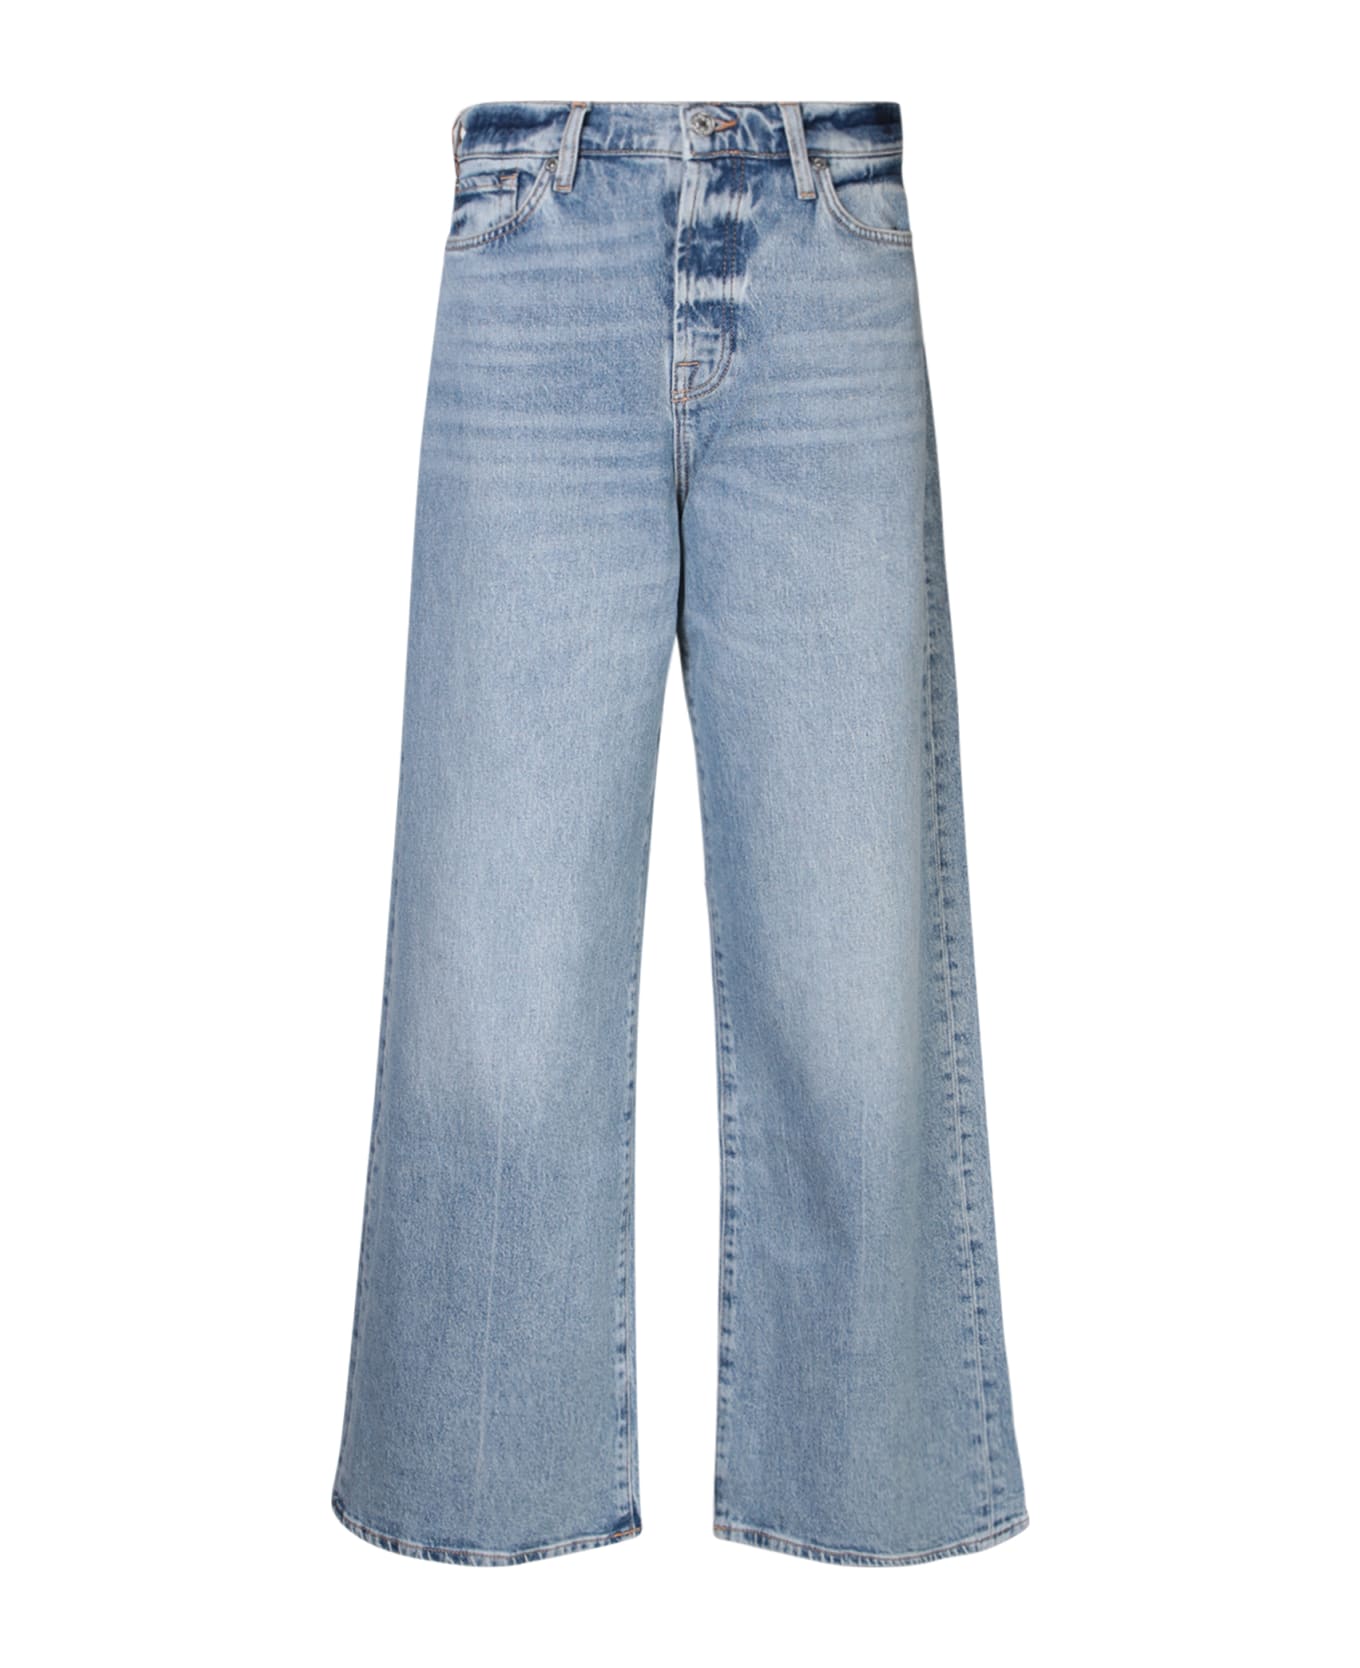 7 For All Mankind Zoey Wide Leg Light Blue Jeans - Blue